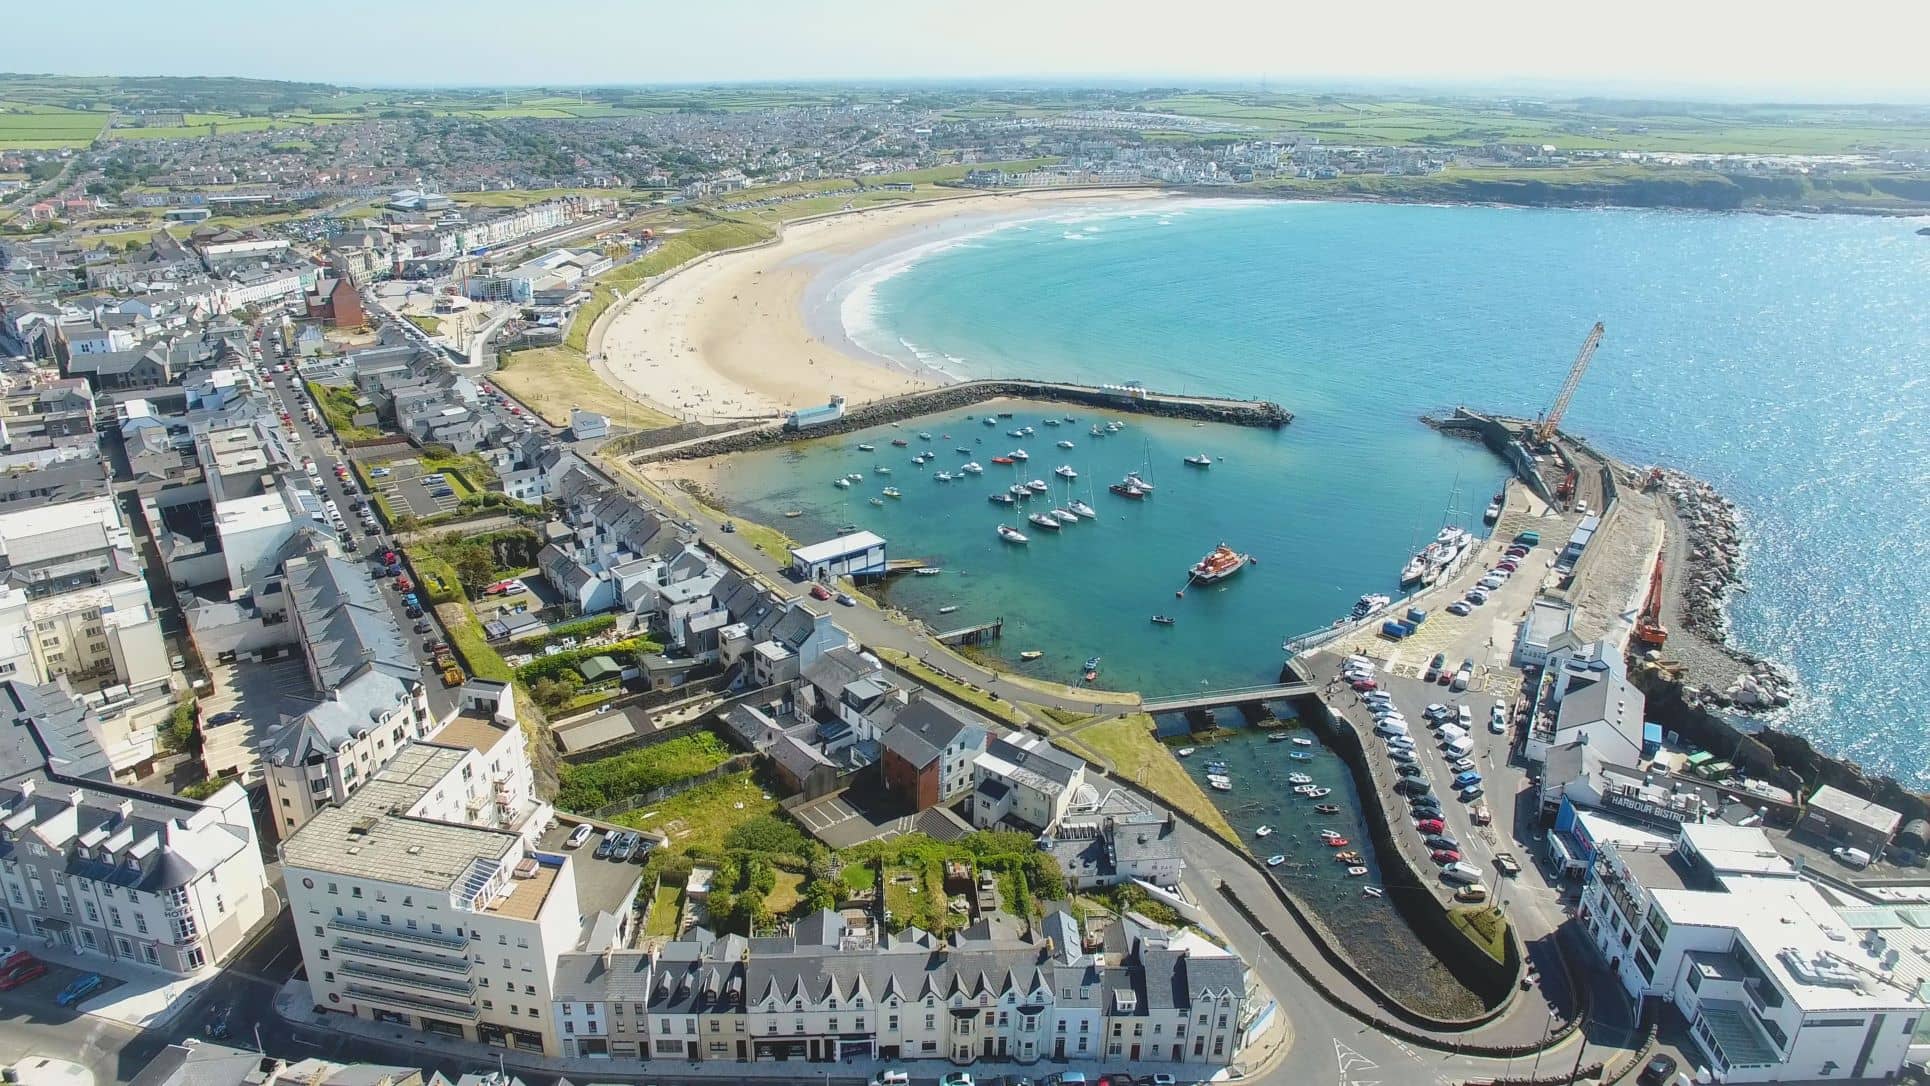 Portrush west strand and harbour from the air (1)